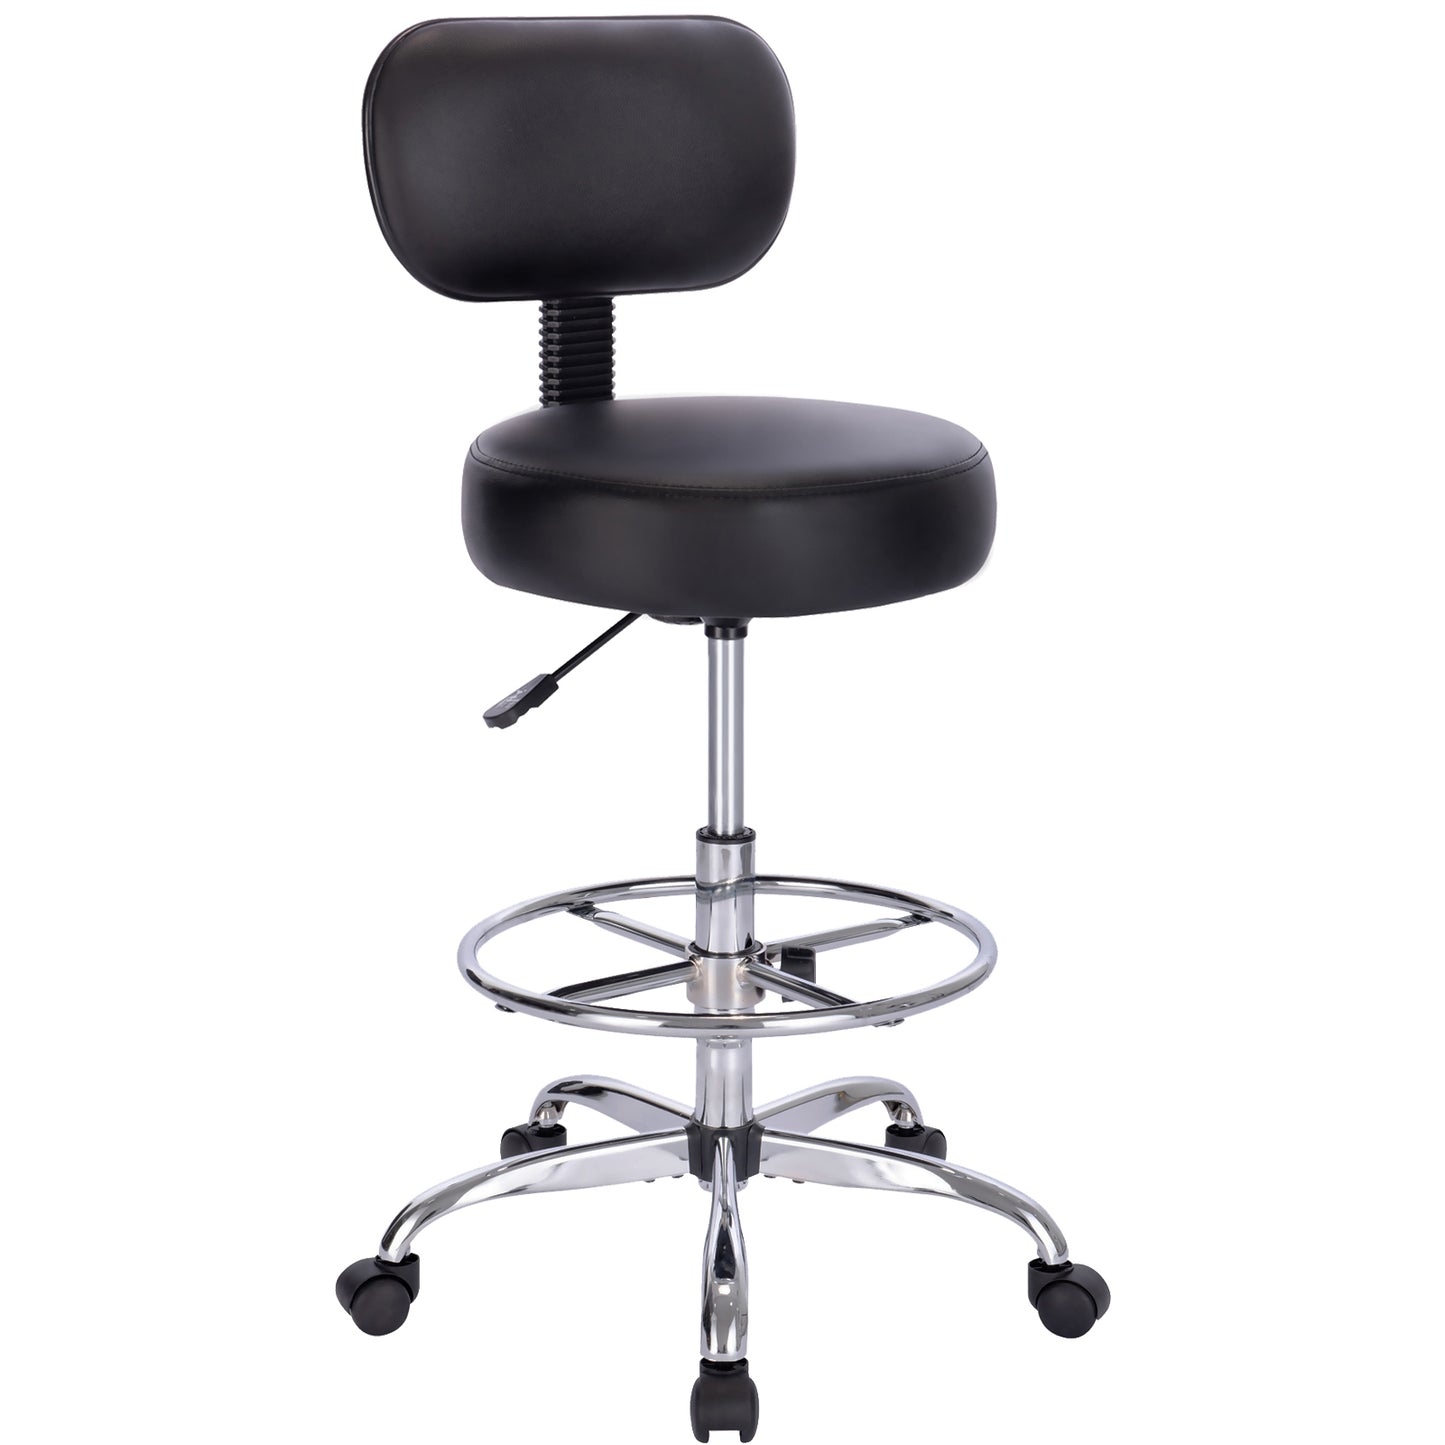 SUPERJARE Drafting Chair with Back, Adjustable Foot Rest Rolling Stool - Black, 7202B